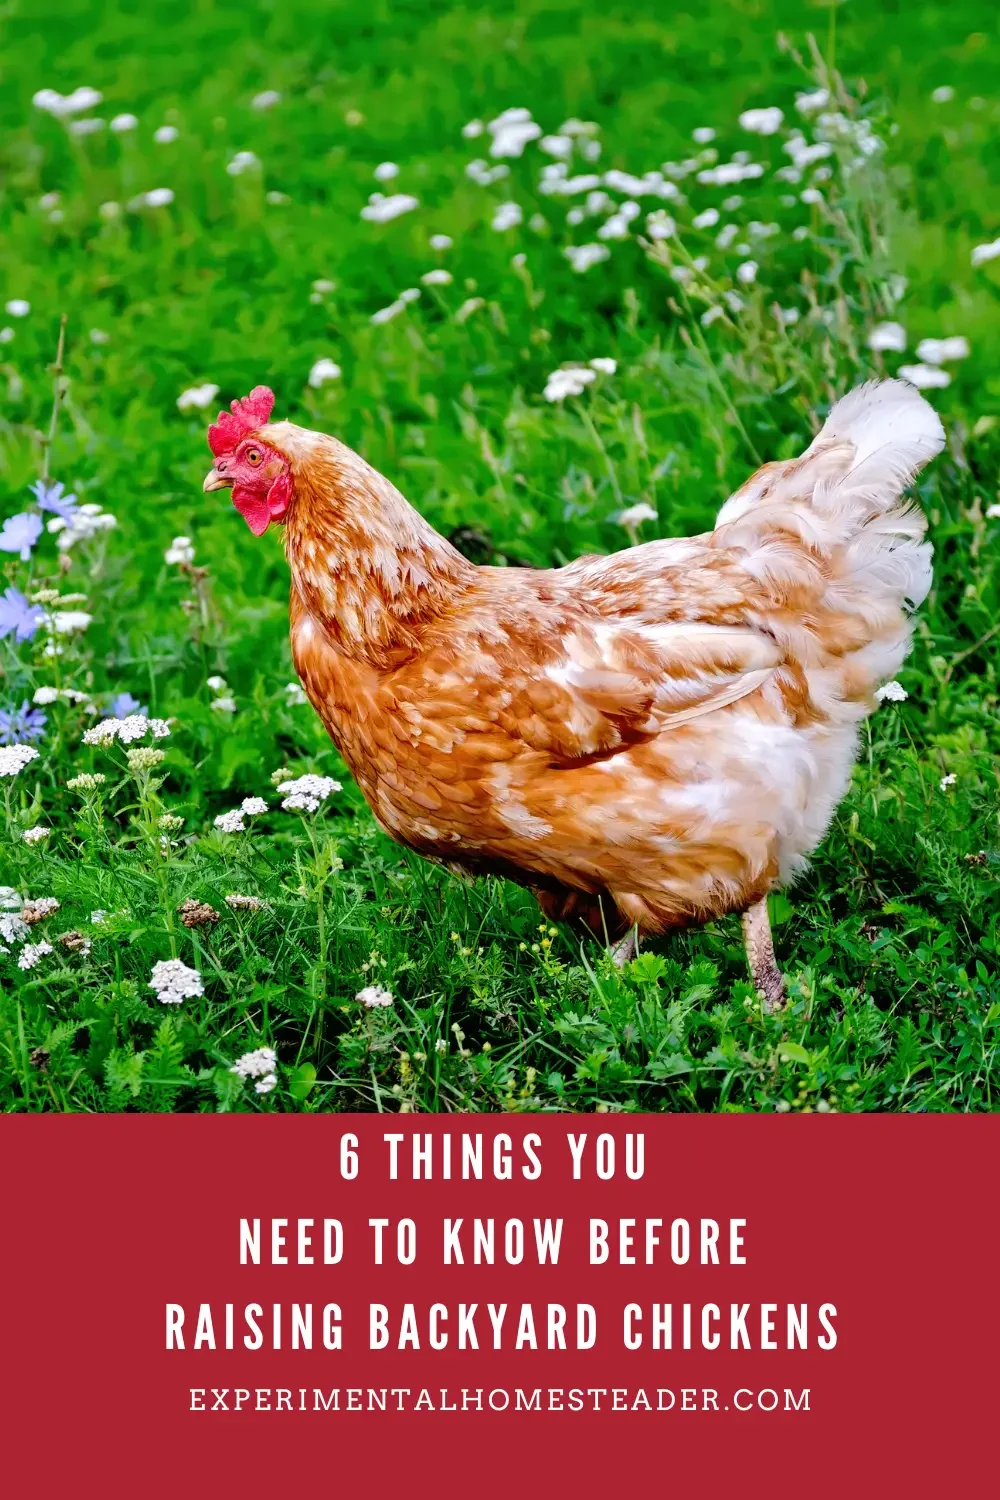 6 Things You Need To Know Before Raising Backyard Chickens